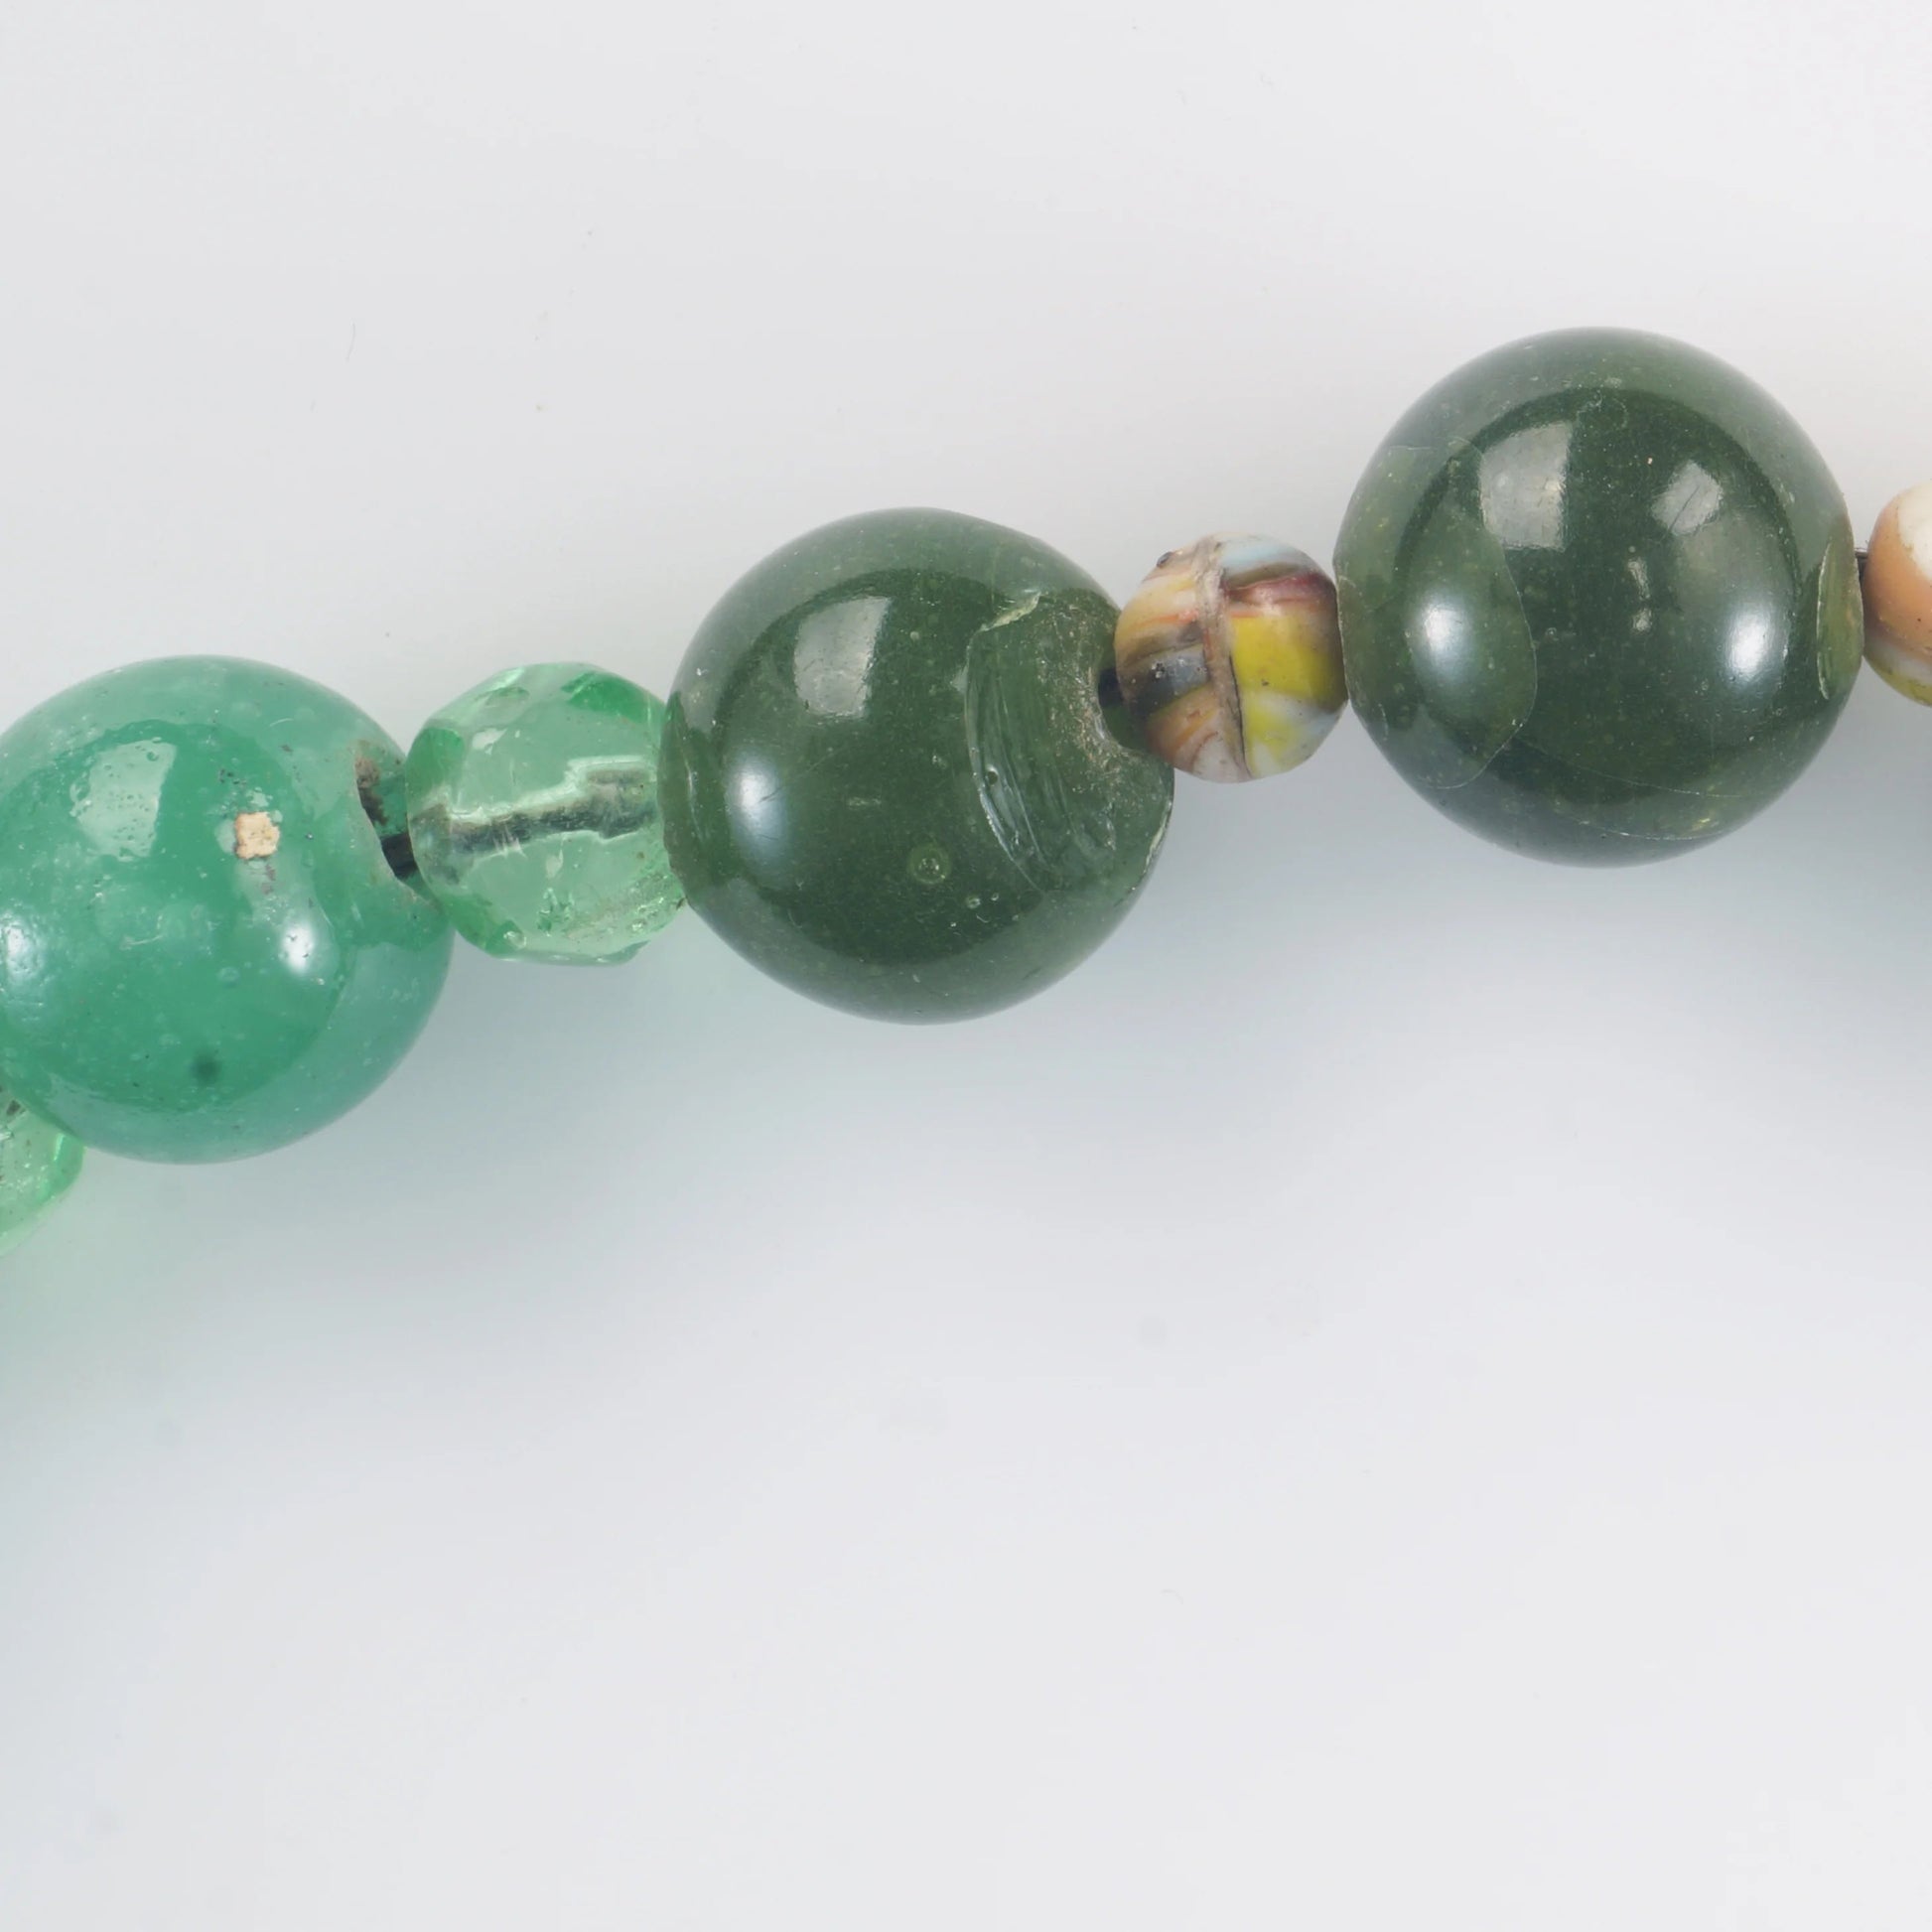 Chinese Antique Peking Glass Bead Necklace Circa 1900 - Bear and Raven Antiques